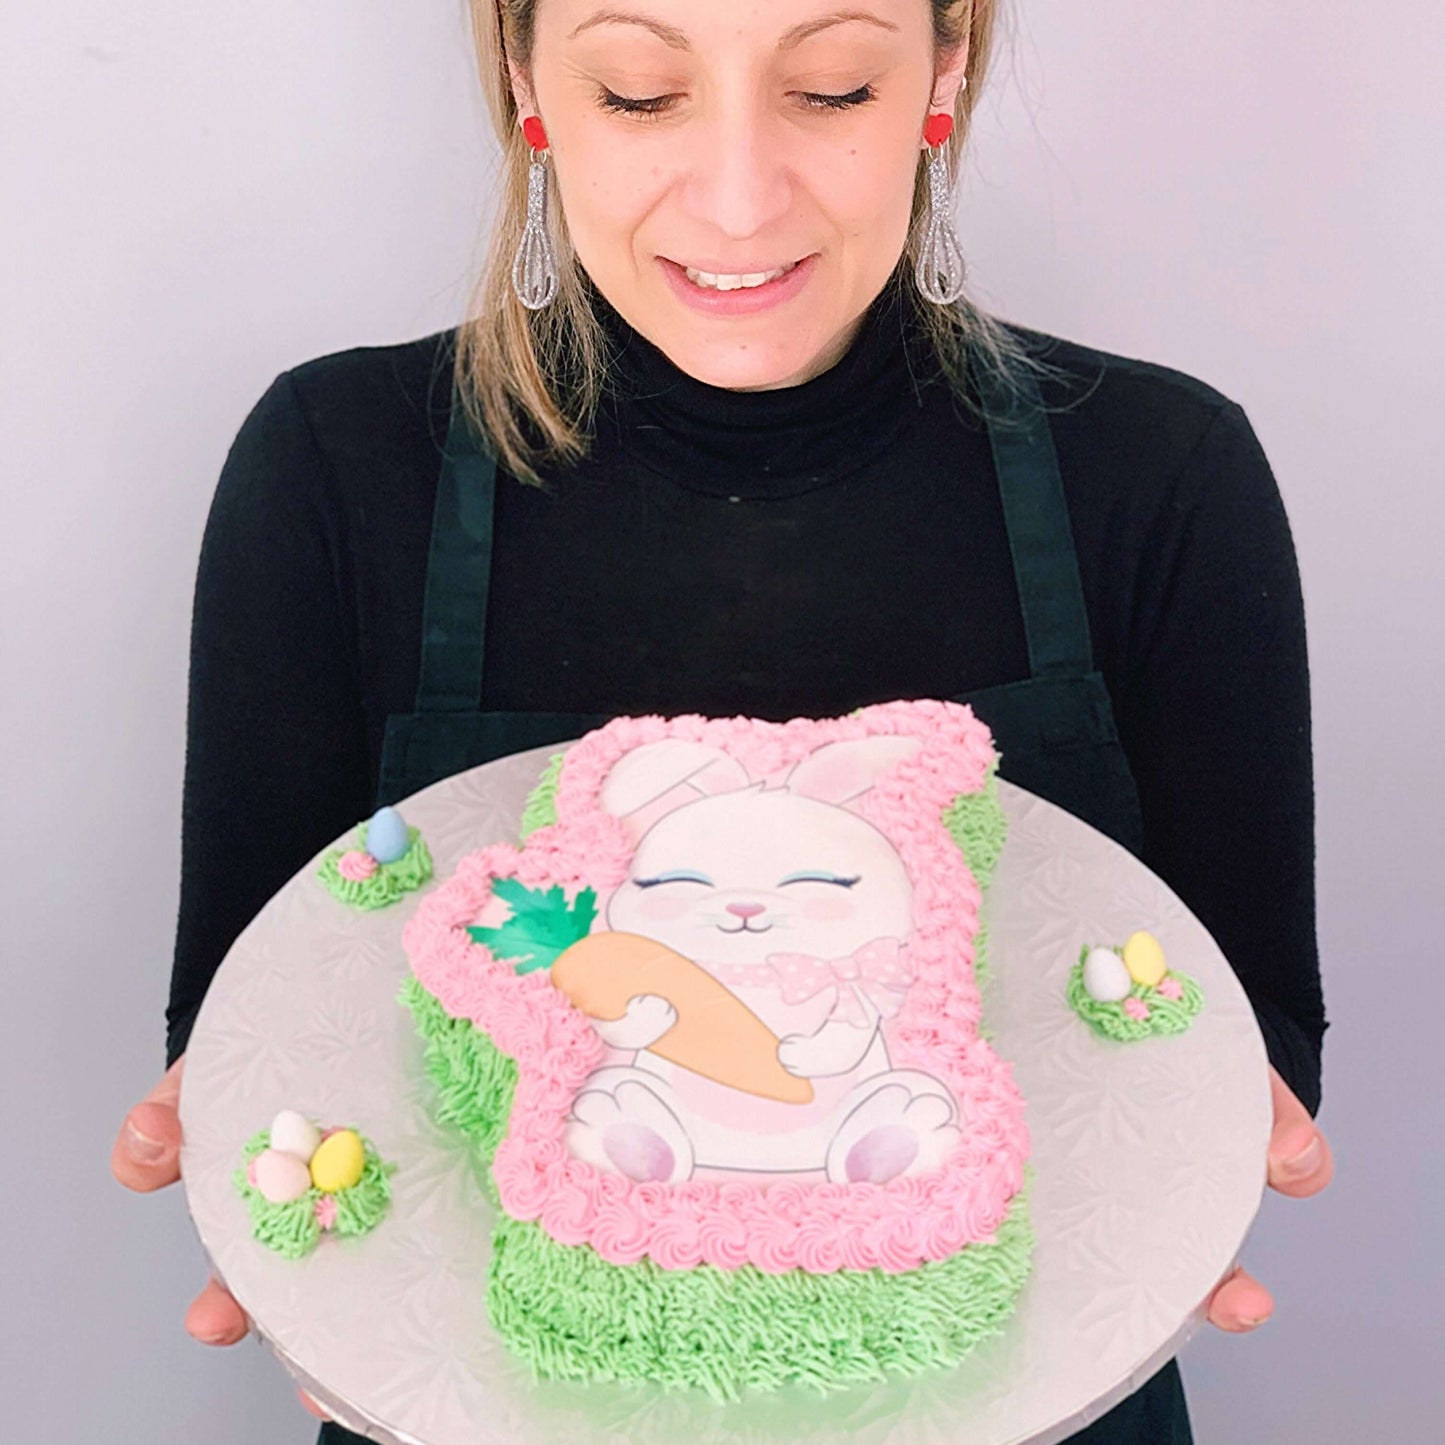 "Happy Easter Carrot Cake" Class with Pamela from Pamela Cake Planner